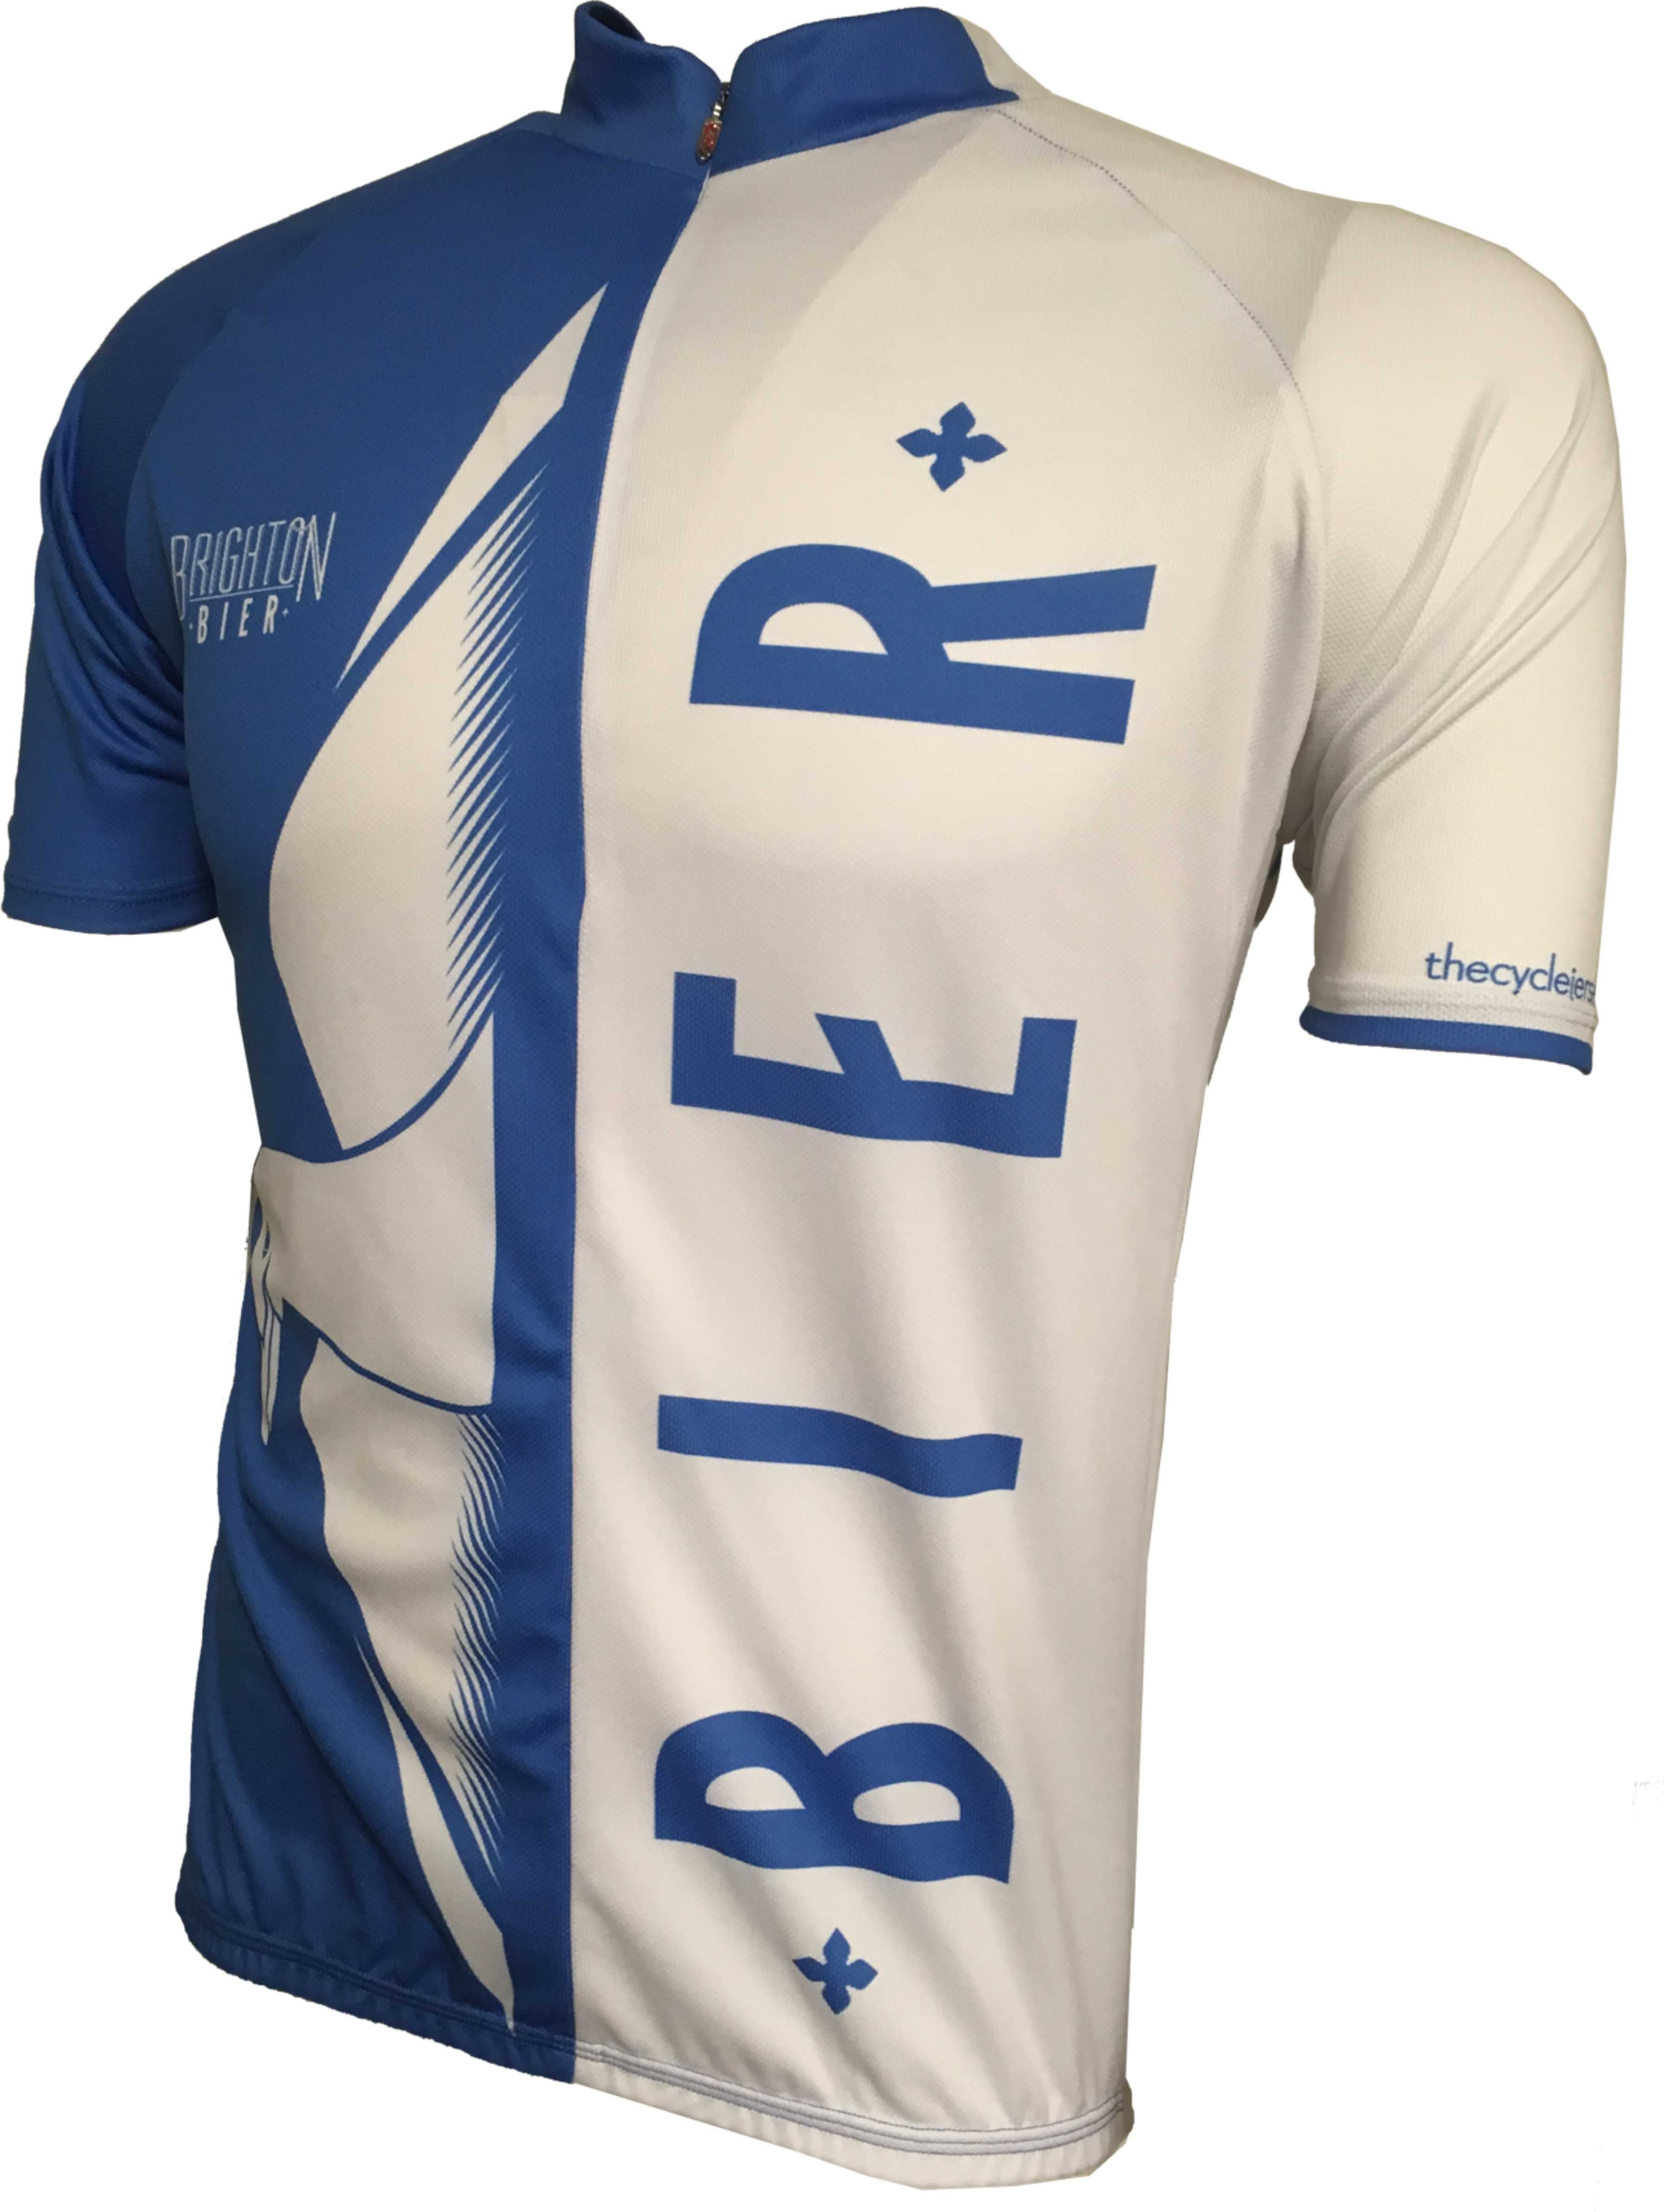 Brighton Bier Can Beer Road Cycle Jersey Front